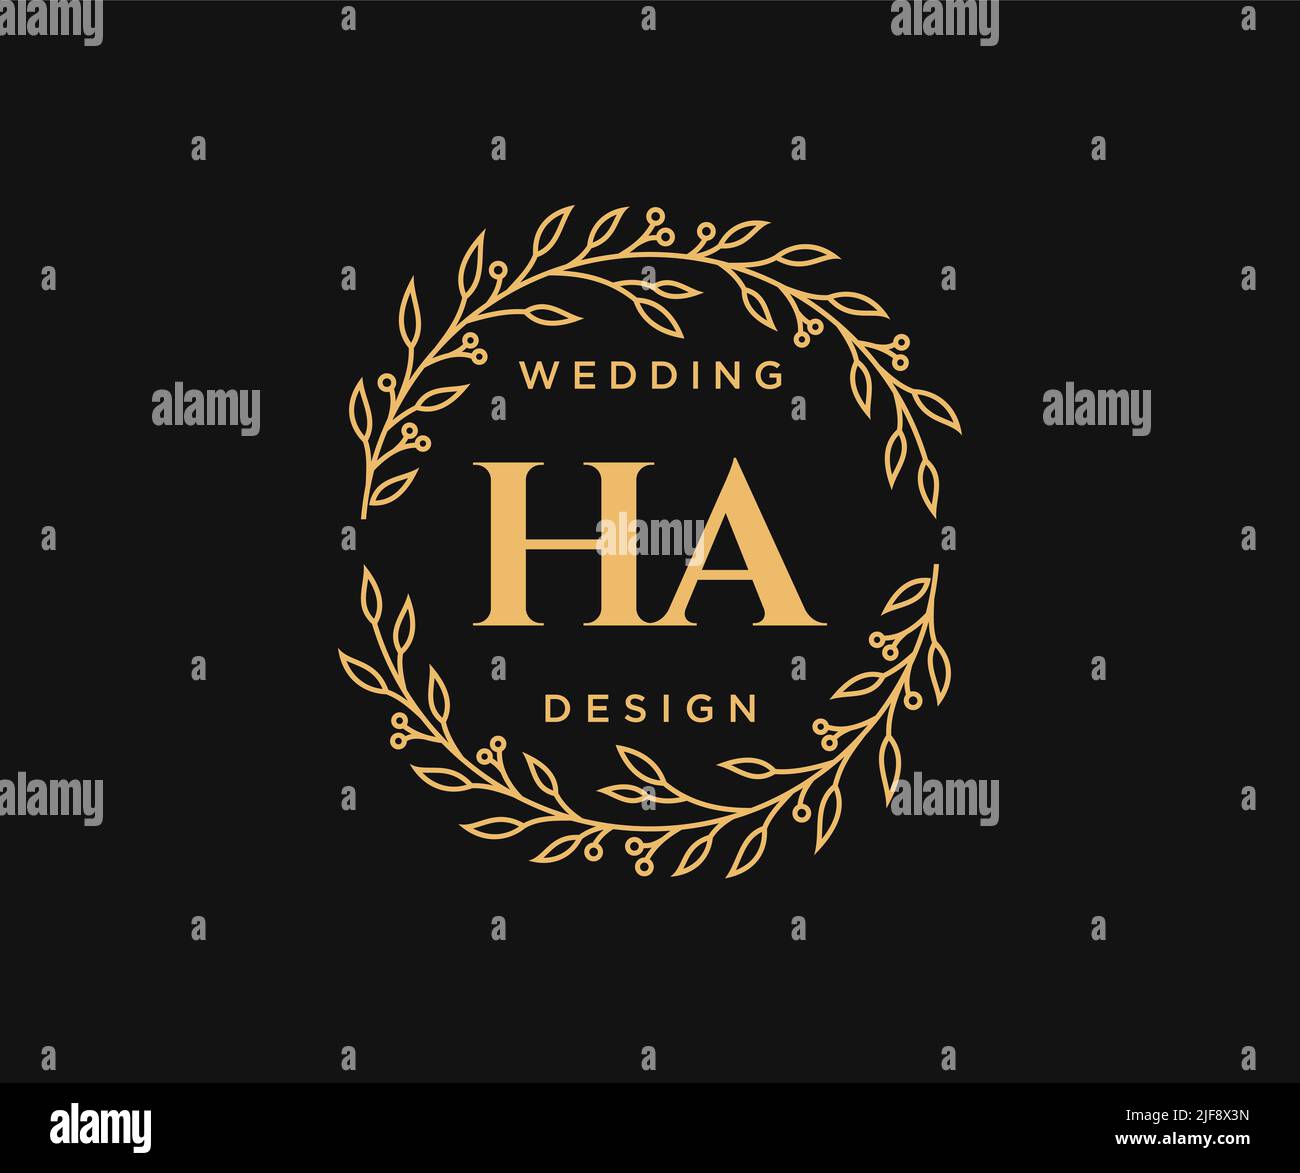 https://c8.alamy.com/comp/2JF8X3N/ha-initials-letter-wedding-monogram-logos-collection-hand-drawn-modern-minimalistic-and-floral-templates-for-invitation-cards-save-the-date-elegant-2JF8X3N.jpg